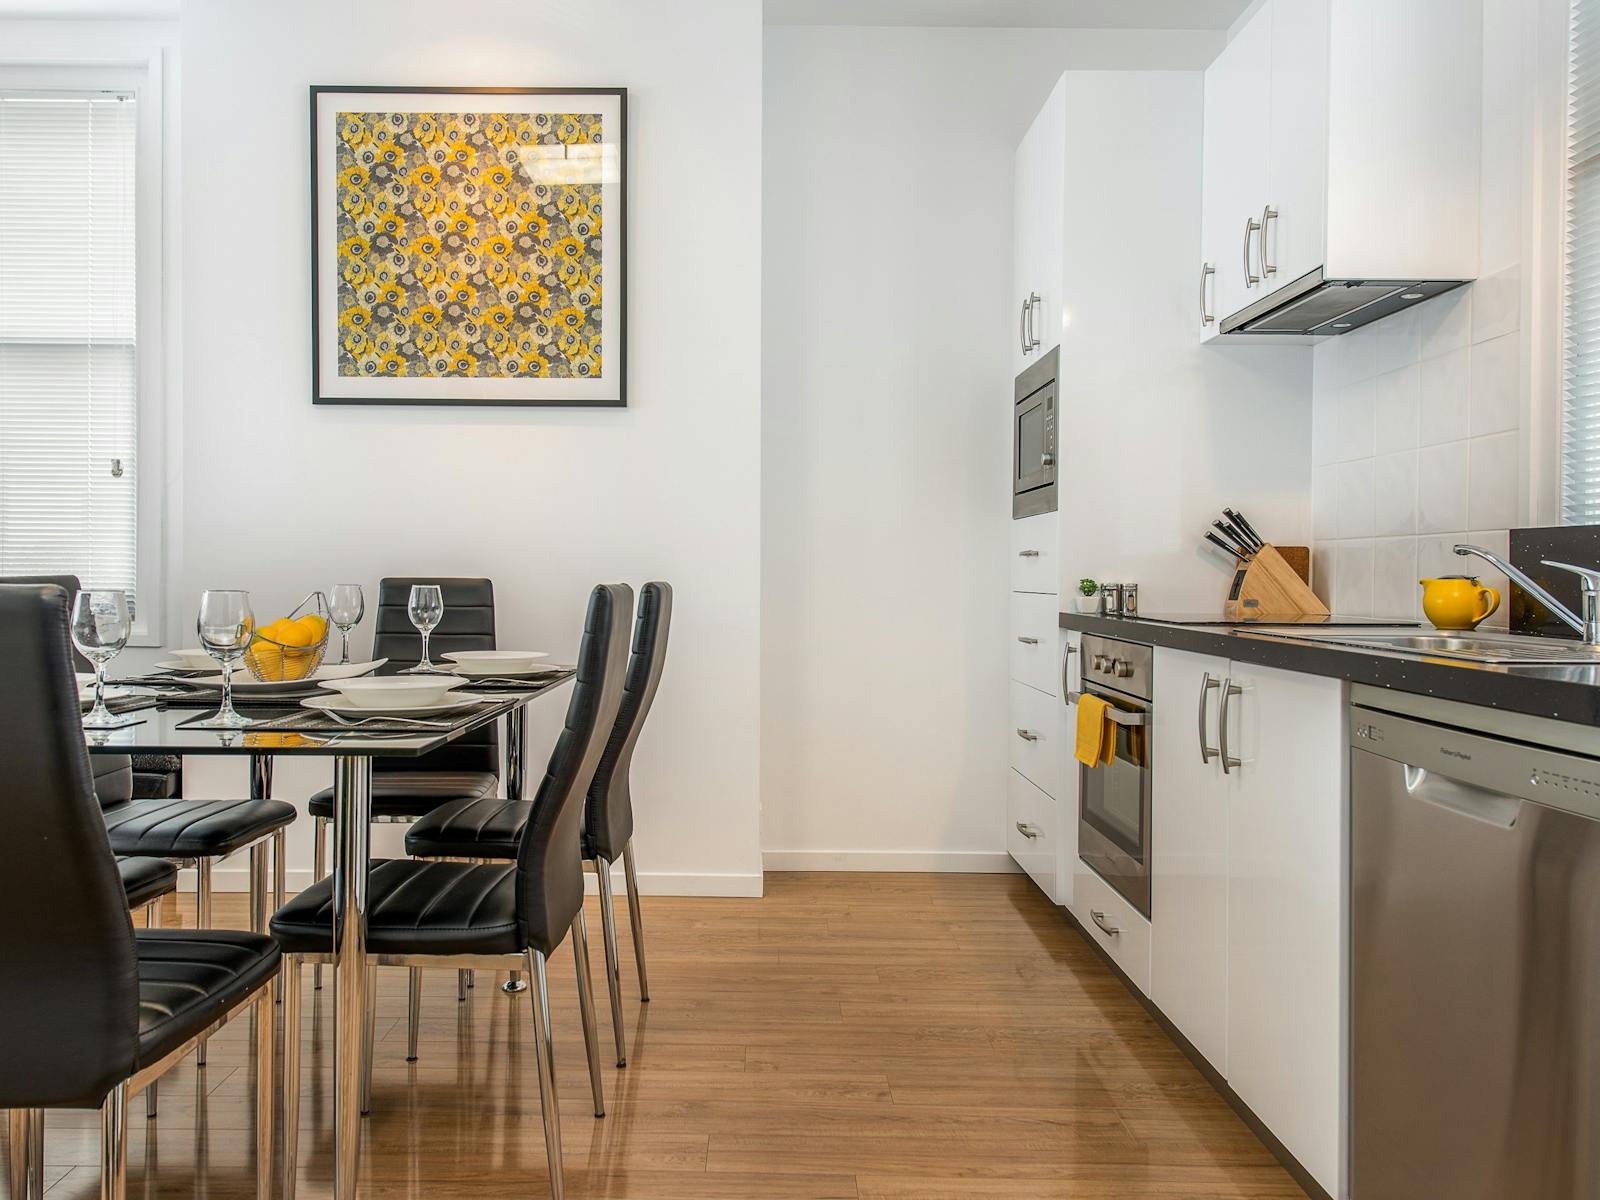 The apartment's fully equipped kitchen with full size appliances and dining table seating six